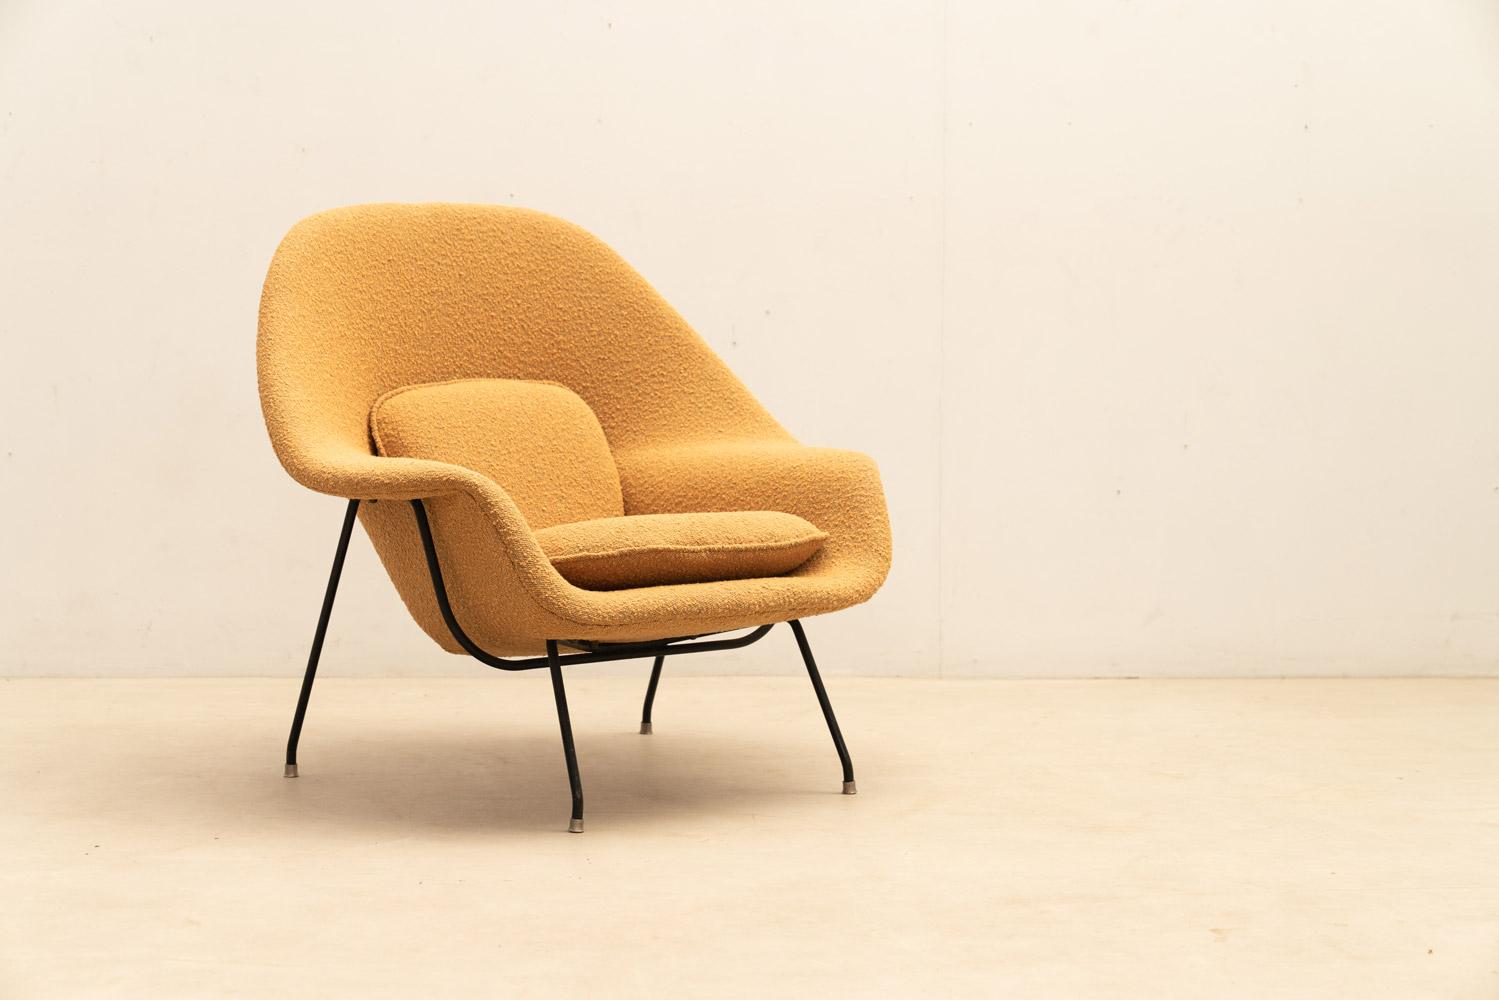 The Womb Chair, designed by Eero Saarinen and produced by Knoll in the 1950s, is a icon of mid-century design. Its curves and form redefine comfort, offering relaxation in any space. Recently reupholstered, it retains its appeal. Whether as a corner